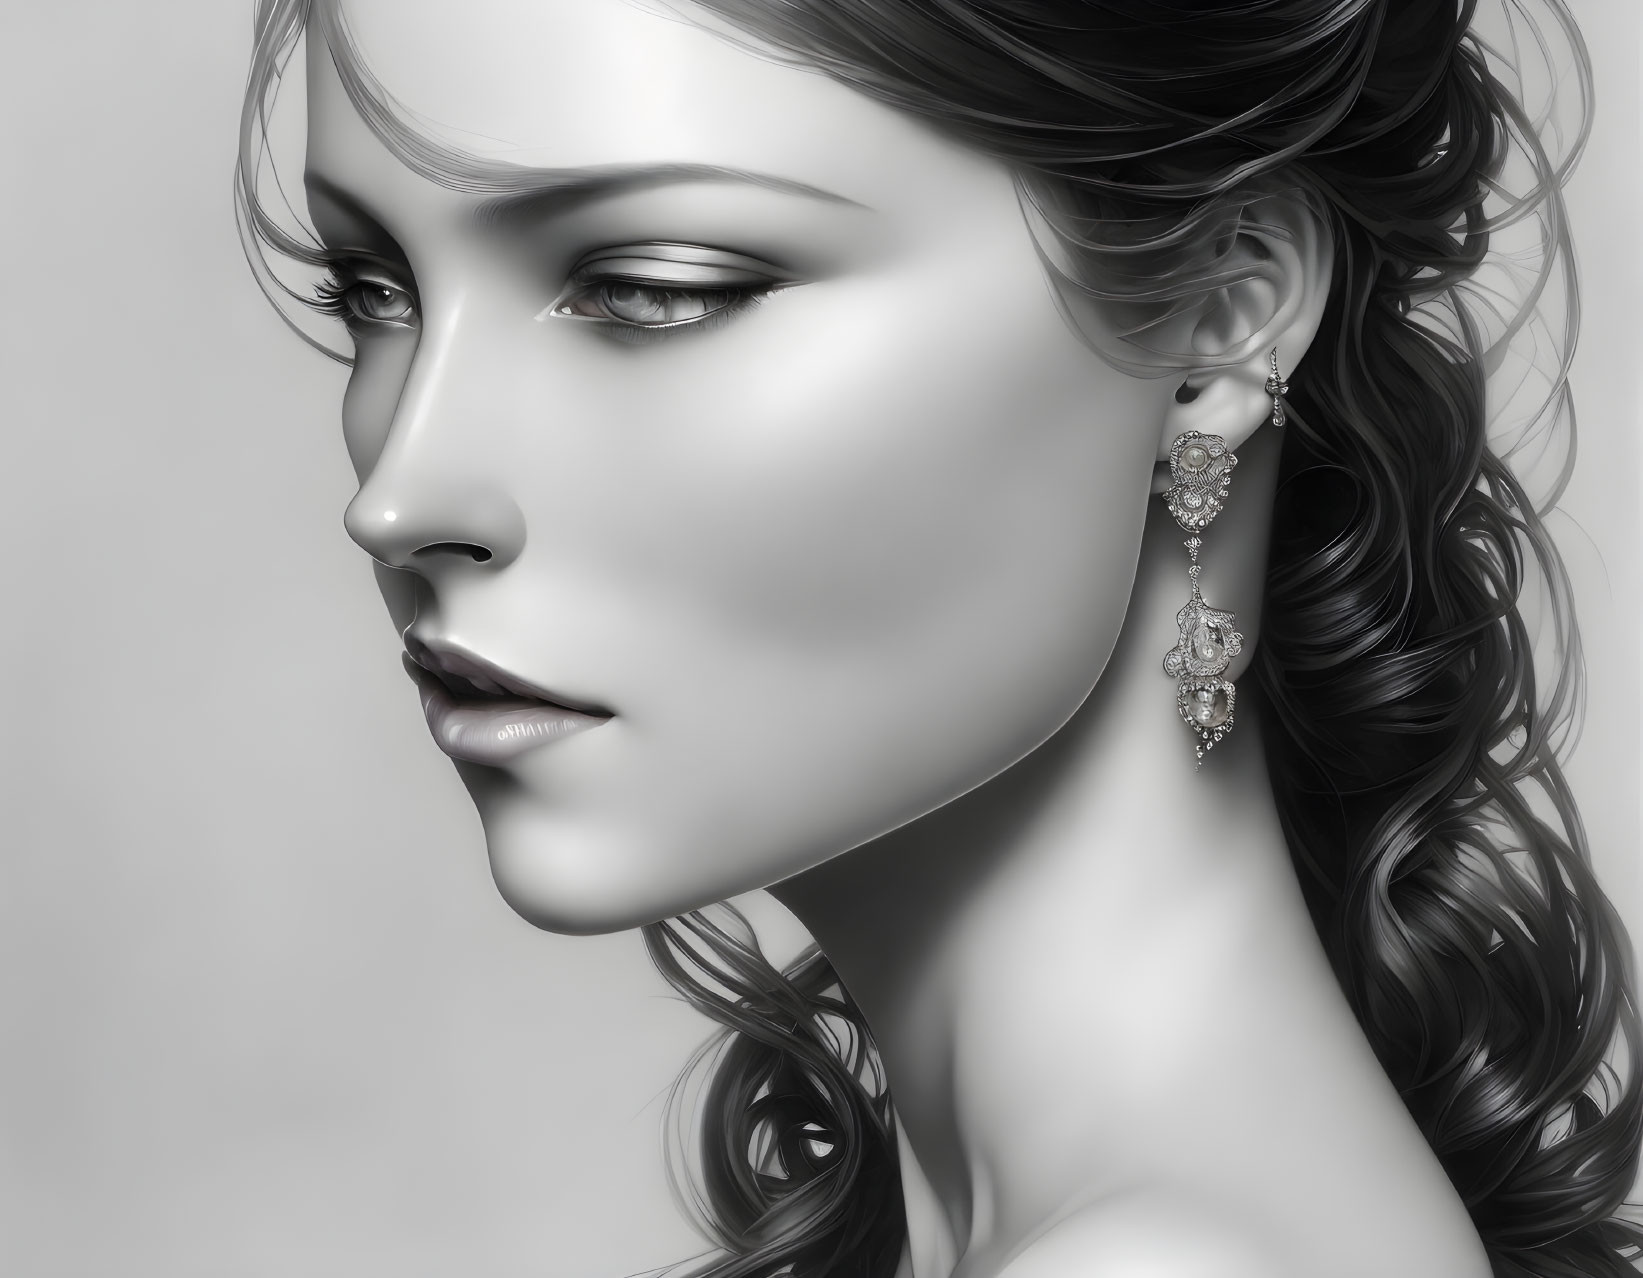 Monochrome image of woman's side profile with elegant earring